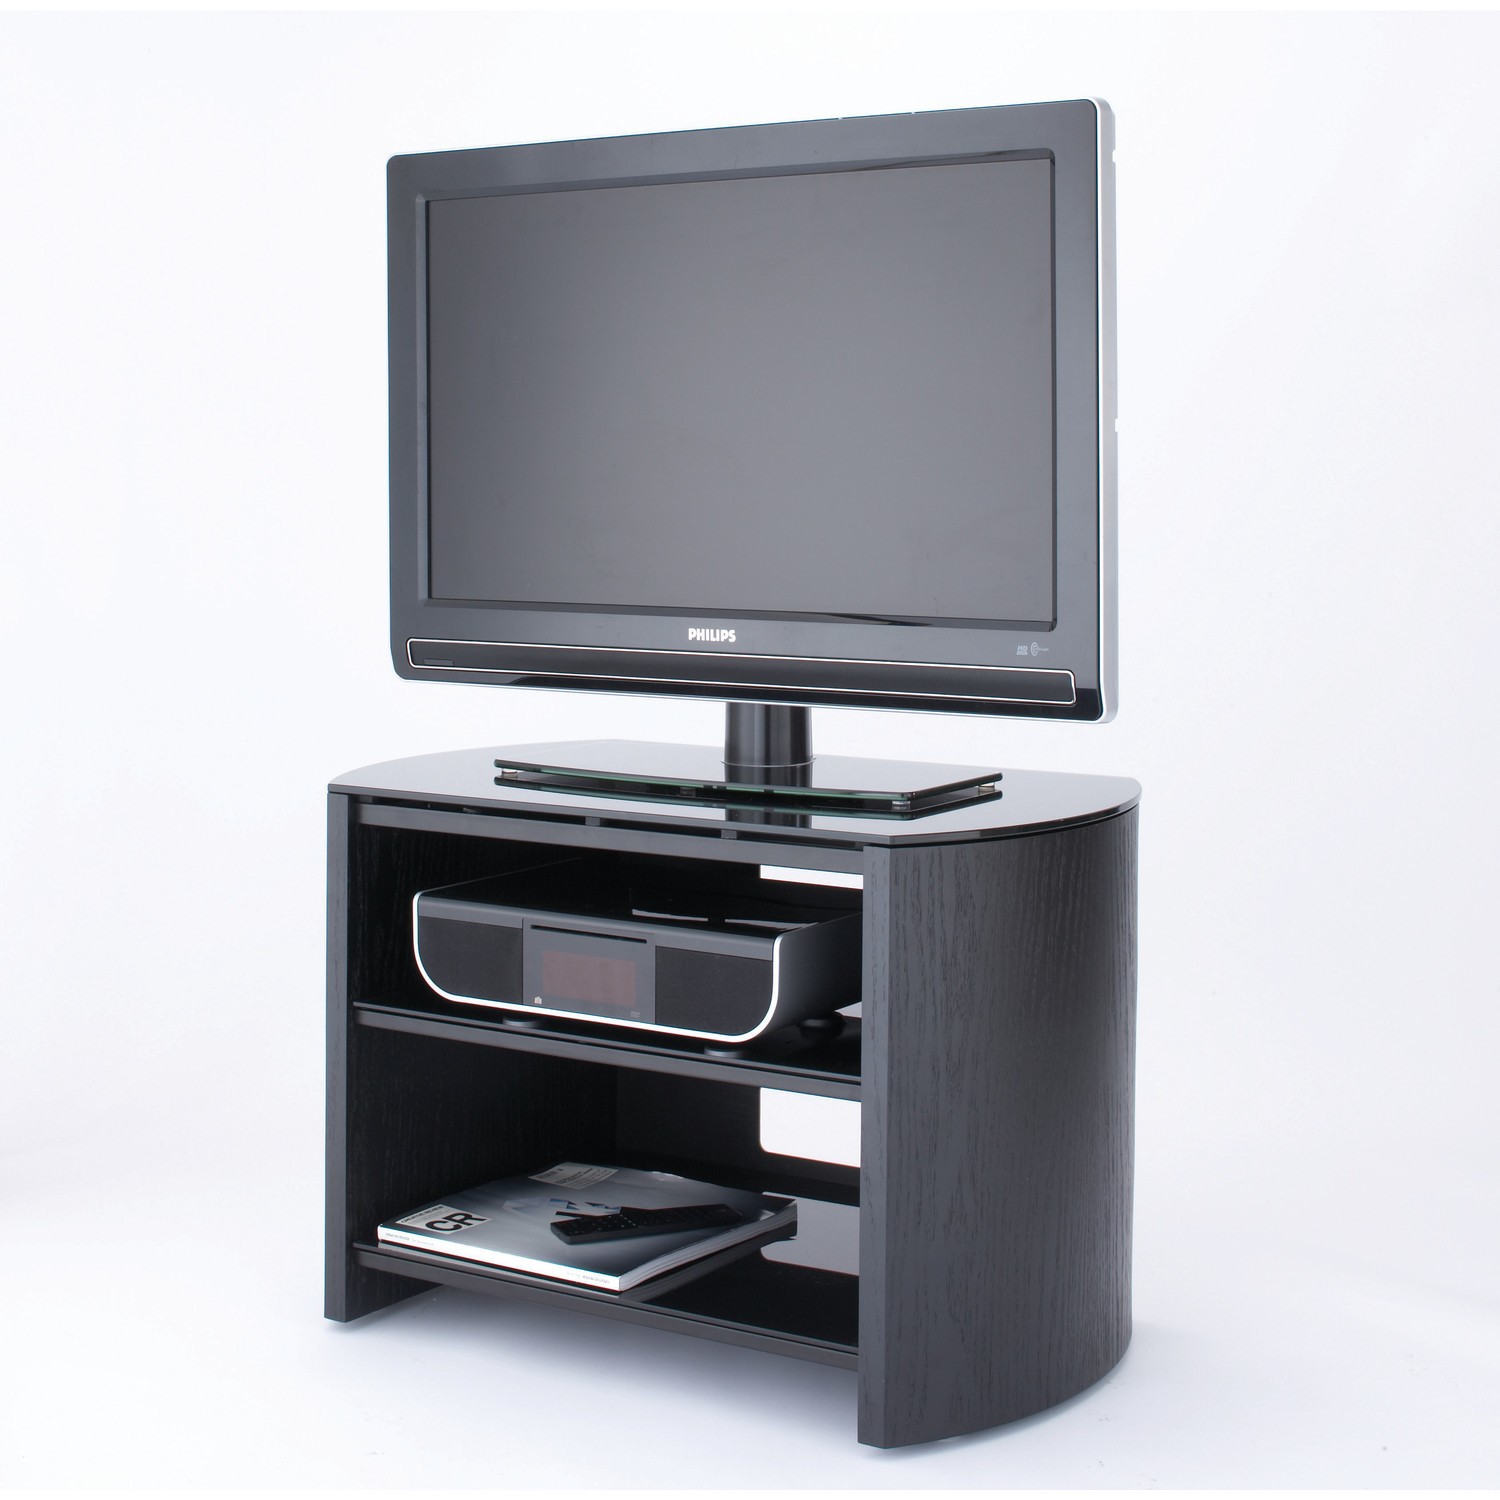 Alphason FW750-BV/B Finewoods 3 Shelf TV Stand for up to ...